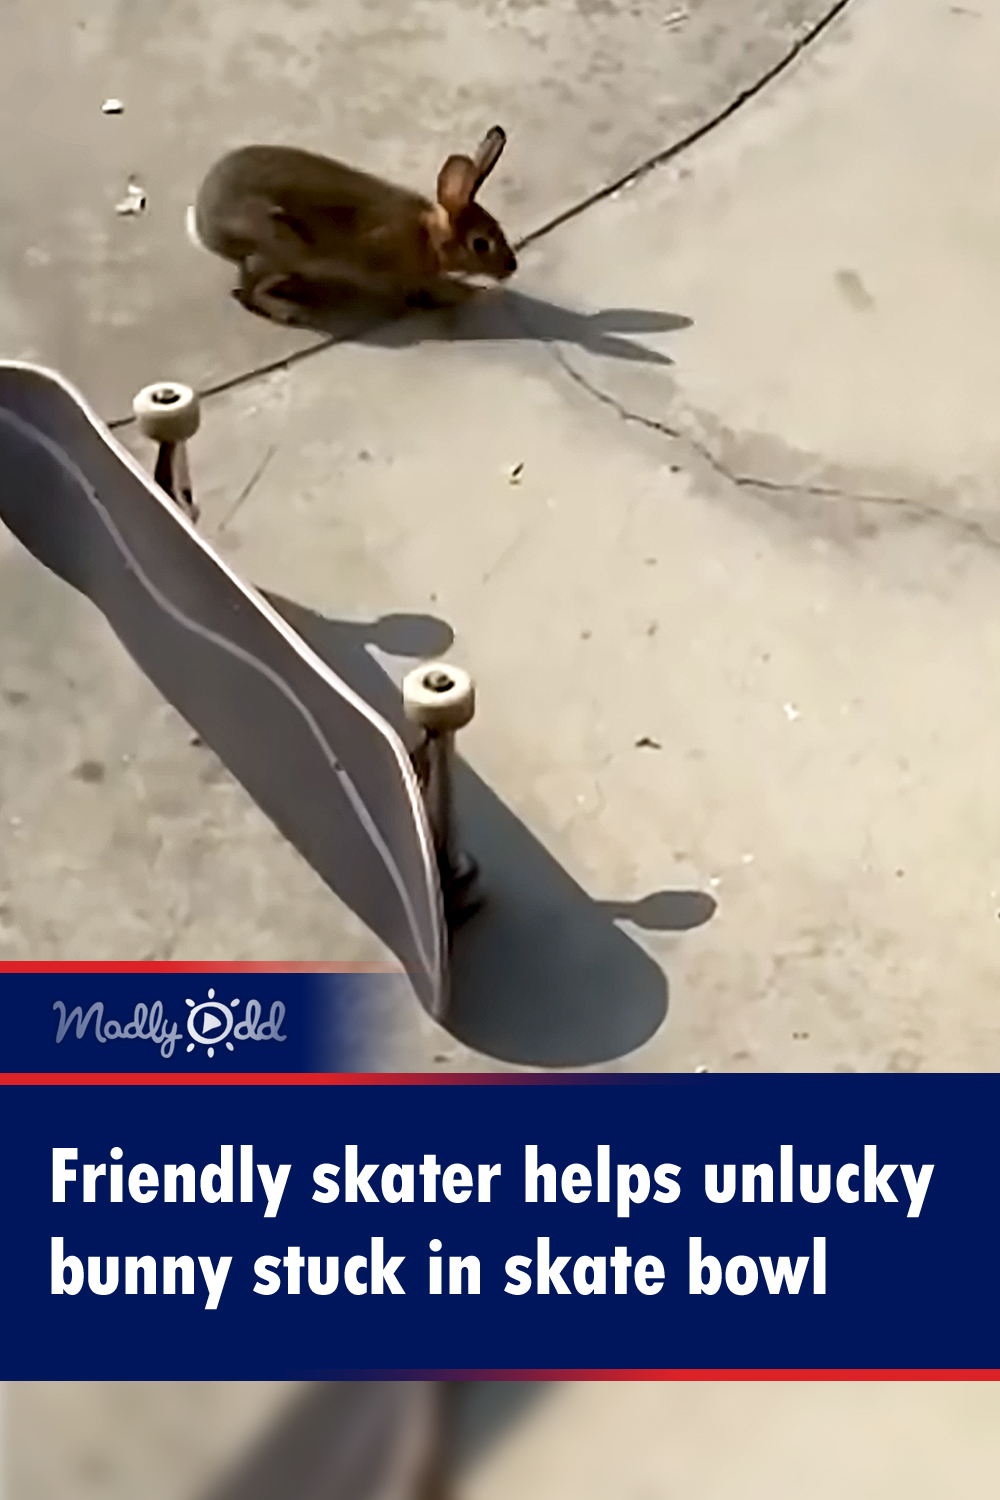 Determined skater helps rabbit live another day